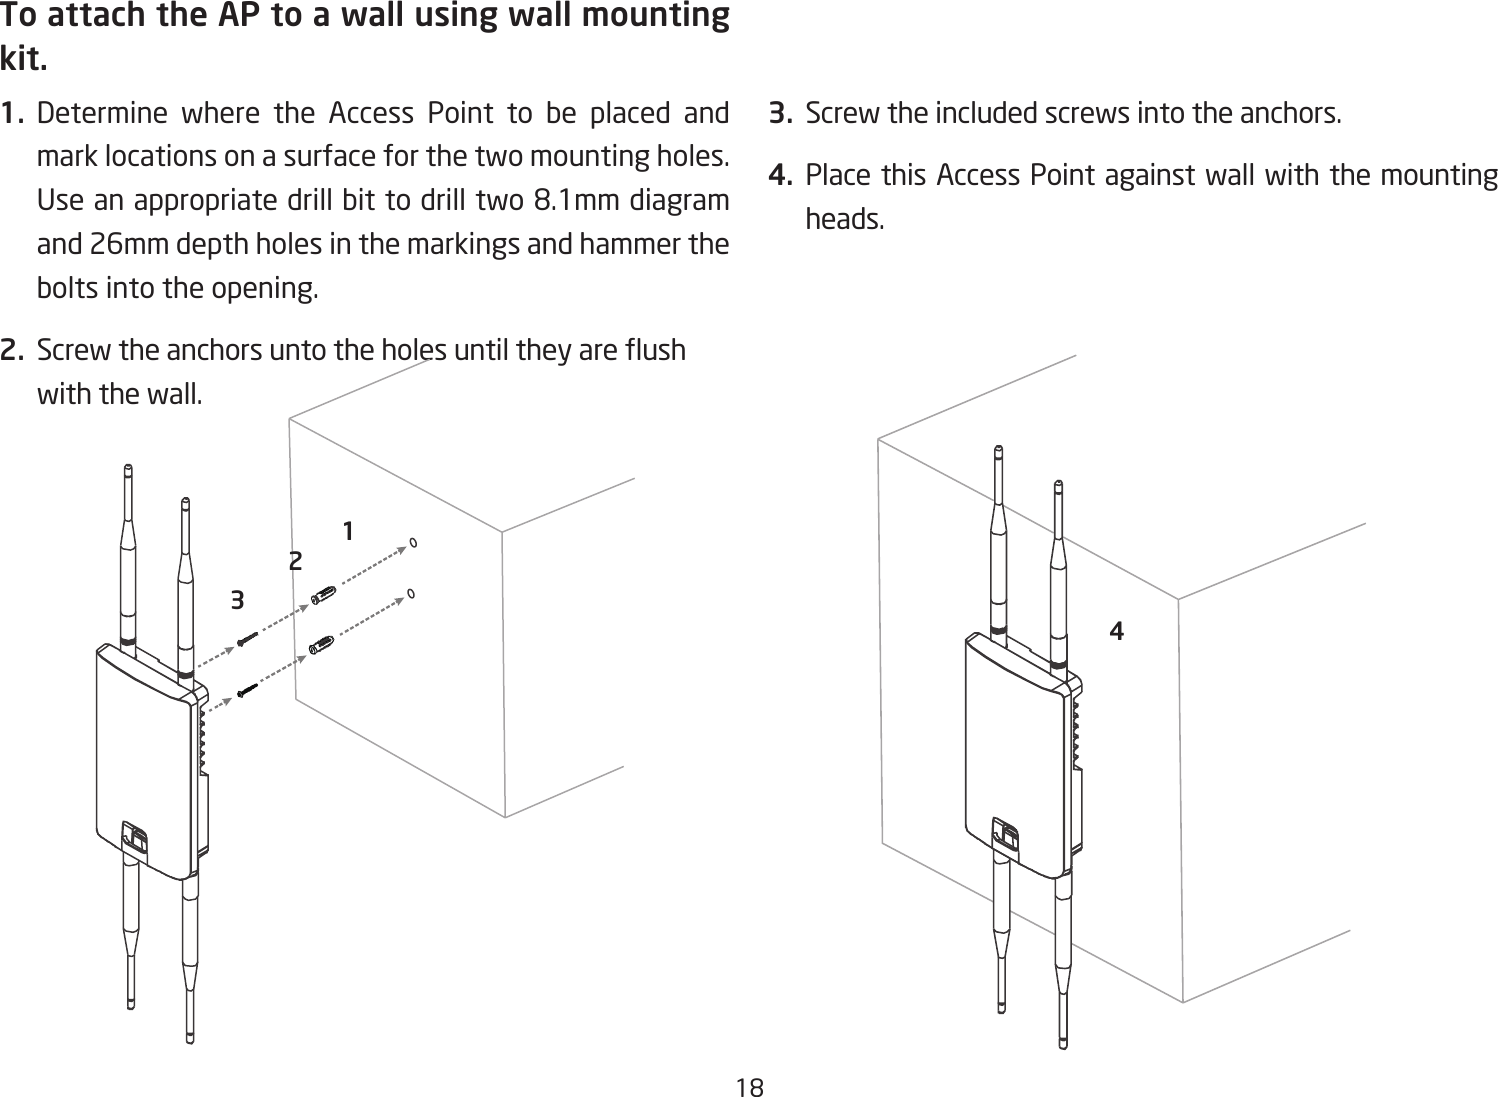 18To attach the AP to a wall using wall mounting kit.1.  Determine where the Access Point to be placed and mark locations on a surface for the two mounting holes. Useanappropriatedrillbittodrilltwo8.1mmdiagramand 26mm depth holes in the markings and hammer the bolts into the opening.2. Screwtheanchorsuntotheholesuntiltheyareushwith the wall. 3.  Screw the included screws into the anchors.4. Place this Access Point against wall with the mounting heads.1243